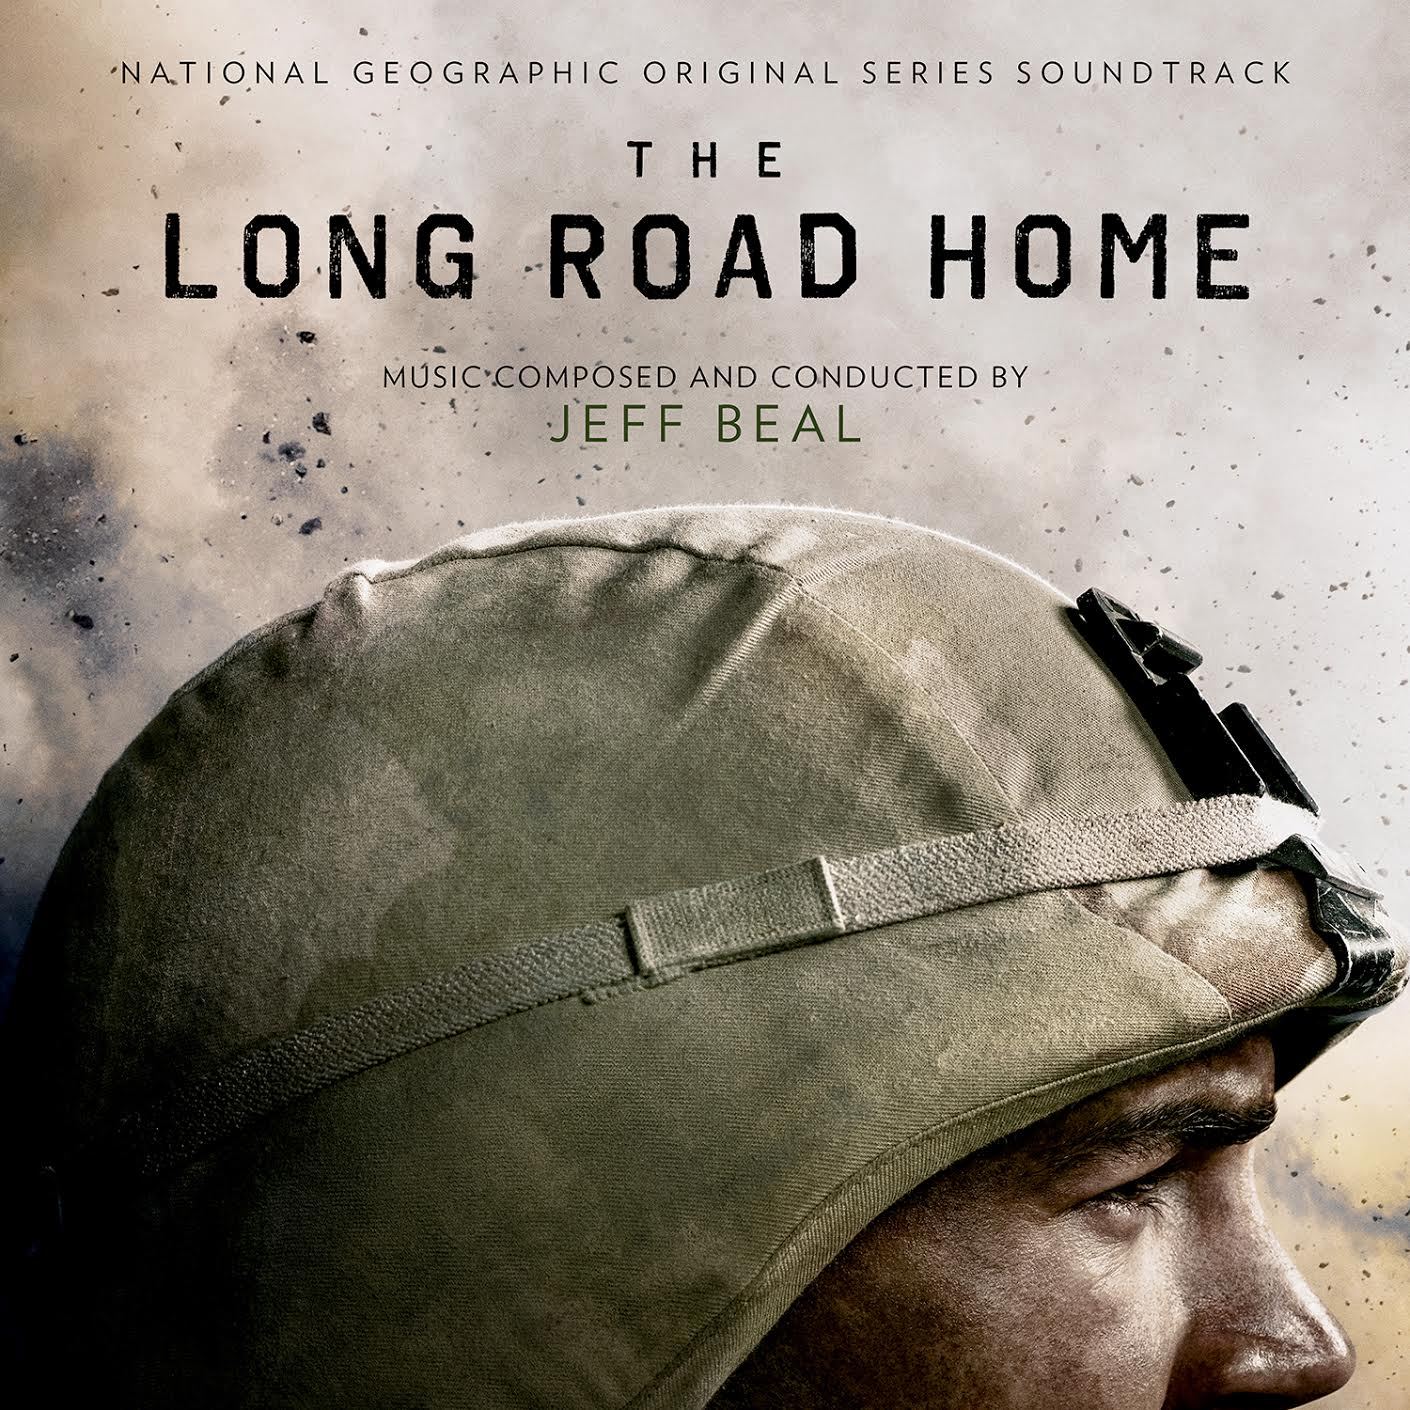 The Long Road Home (Jeff Beal)